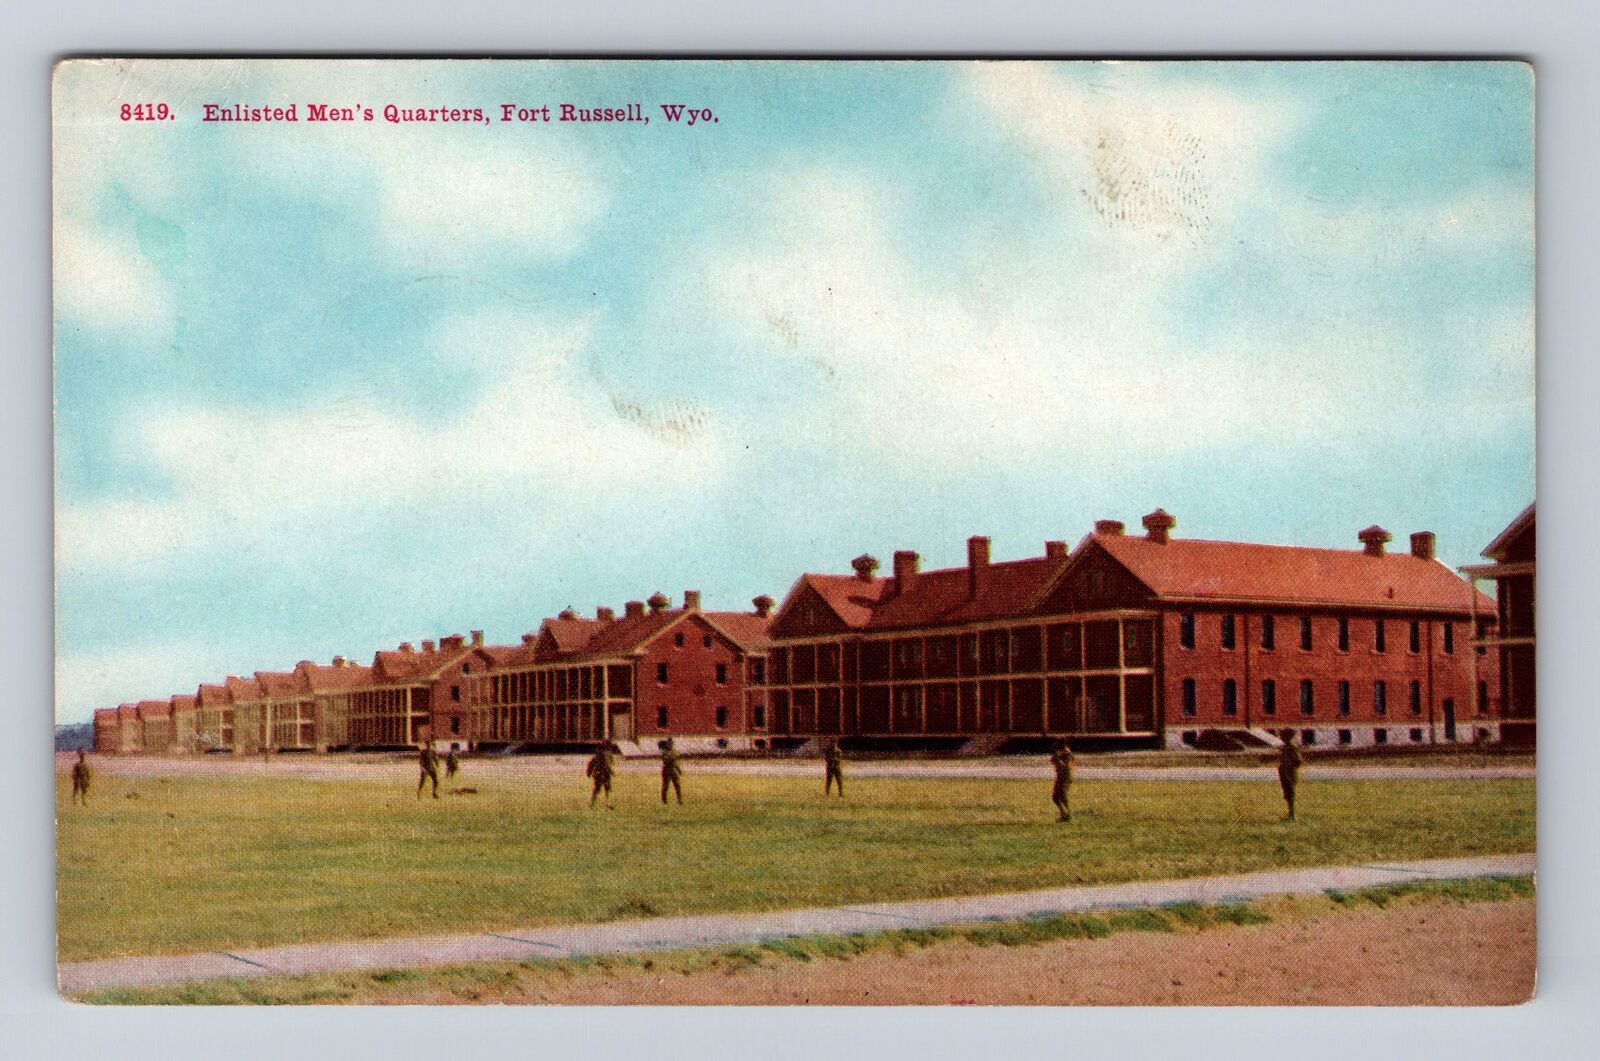 Fort Russell WY-Wyoming, Enlisted Men's Quarters, Antique Vintage Postcard